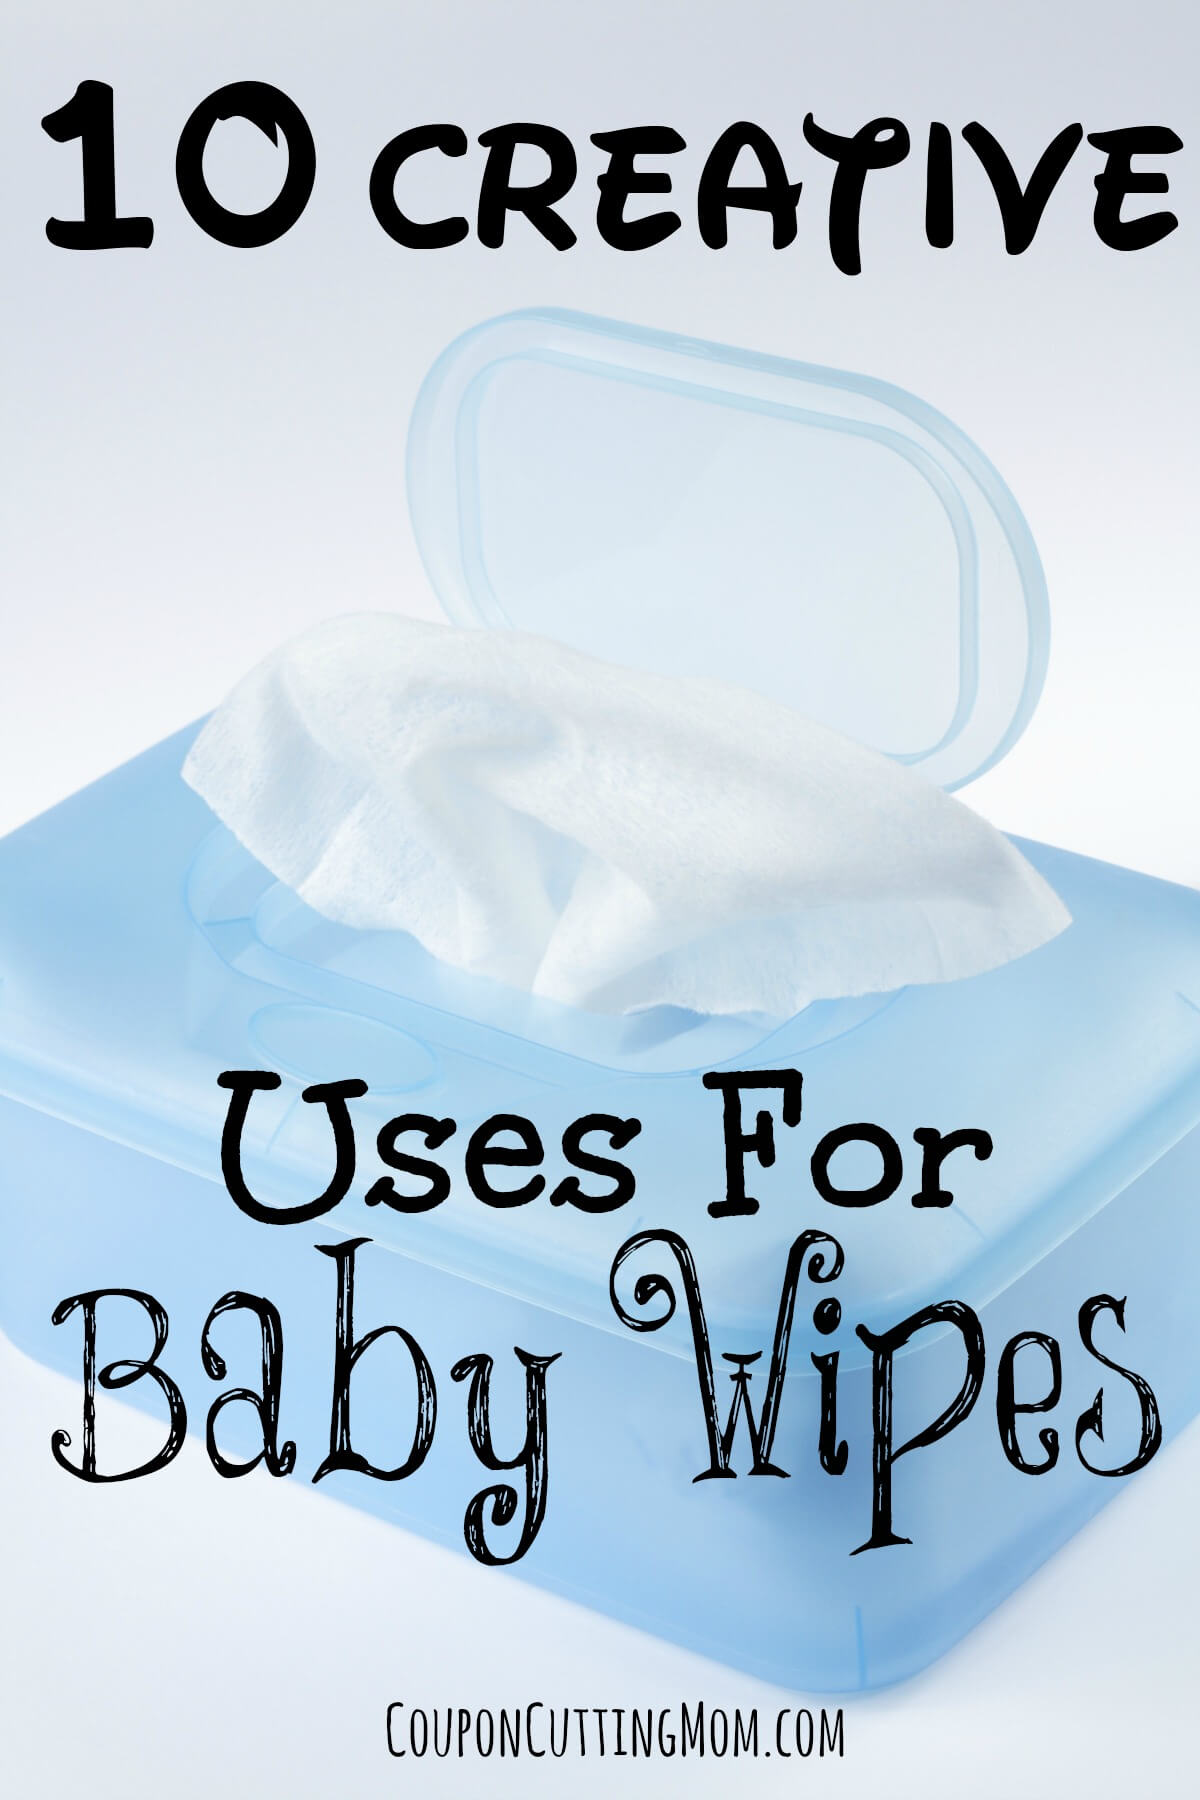 10 Creative Uses For Baby Wipes